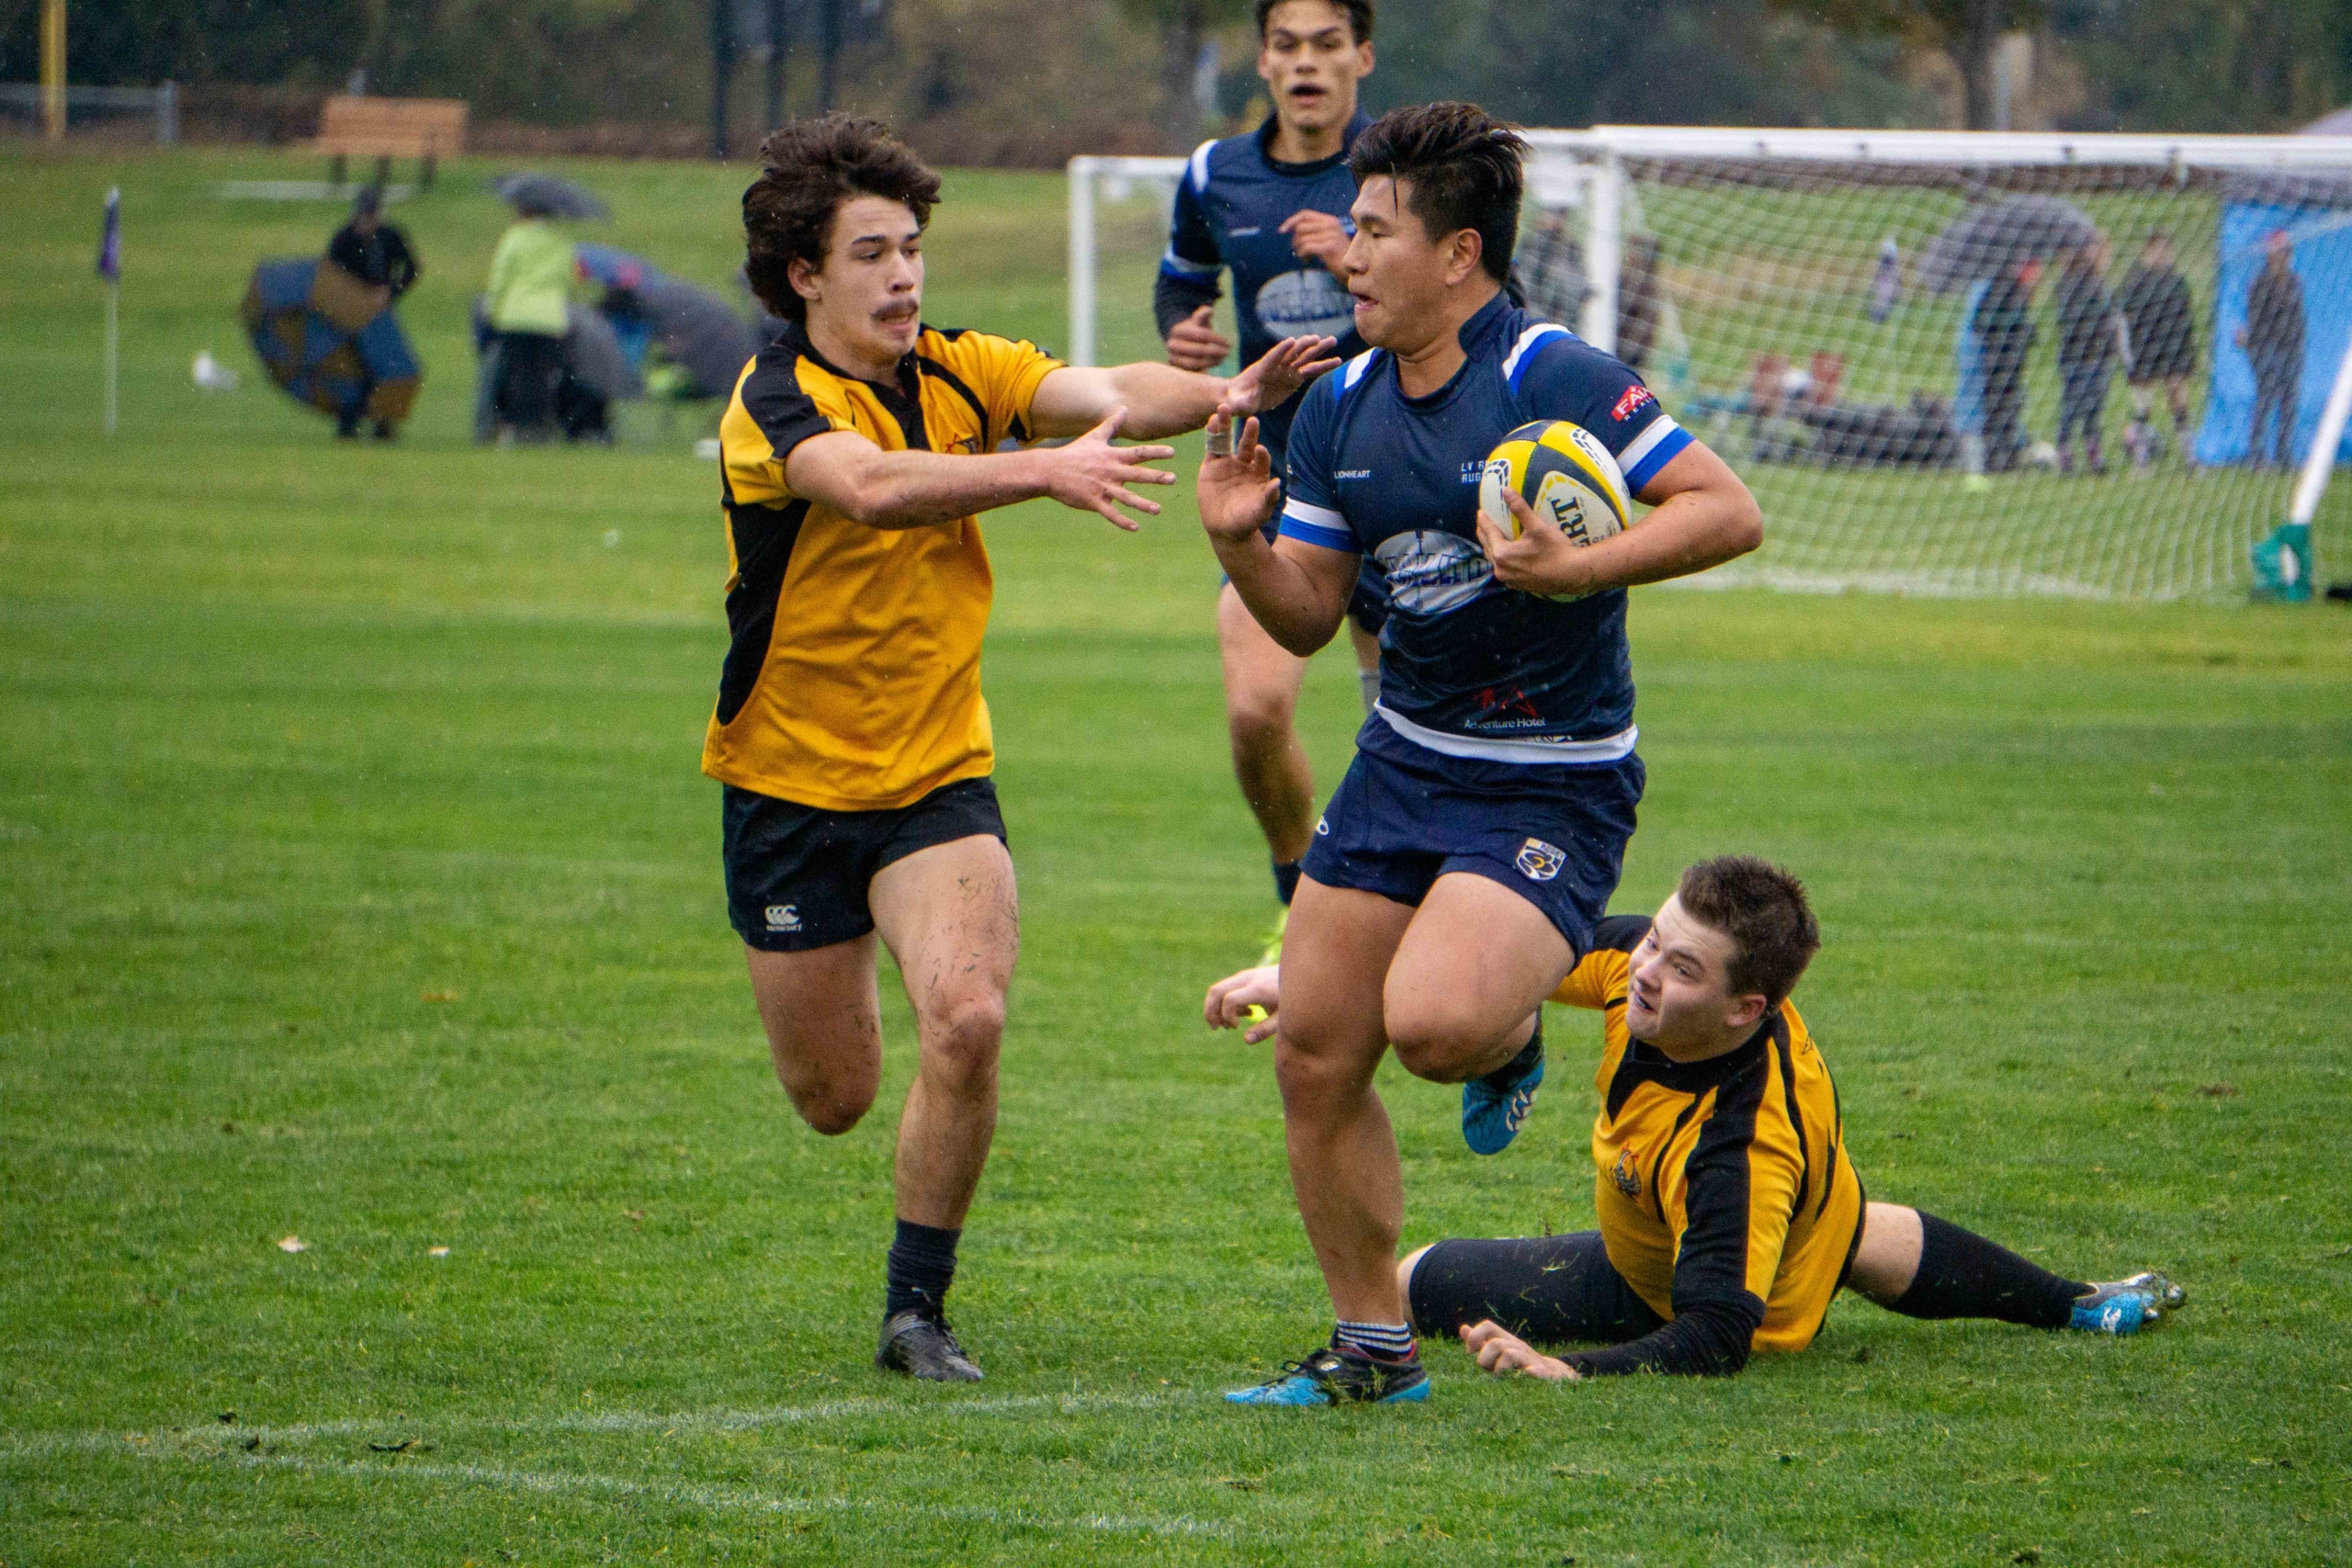 A male Rugby player runs with the ball and evades the opponent